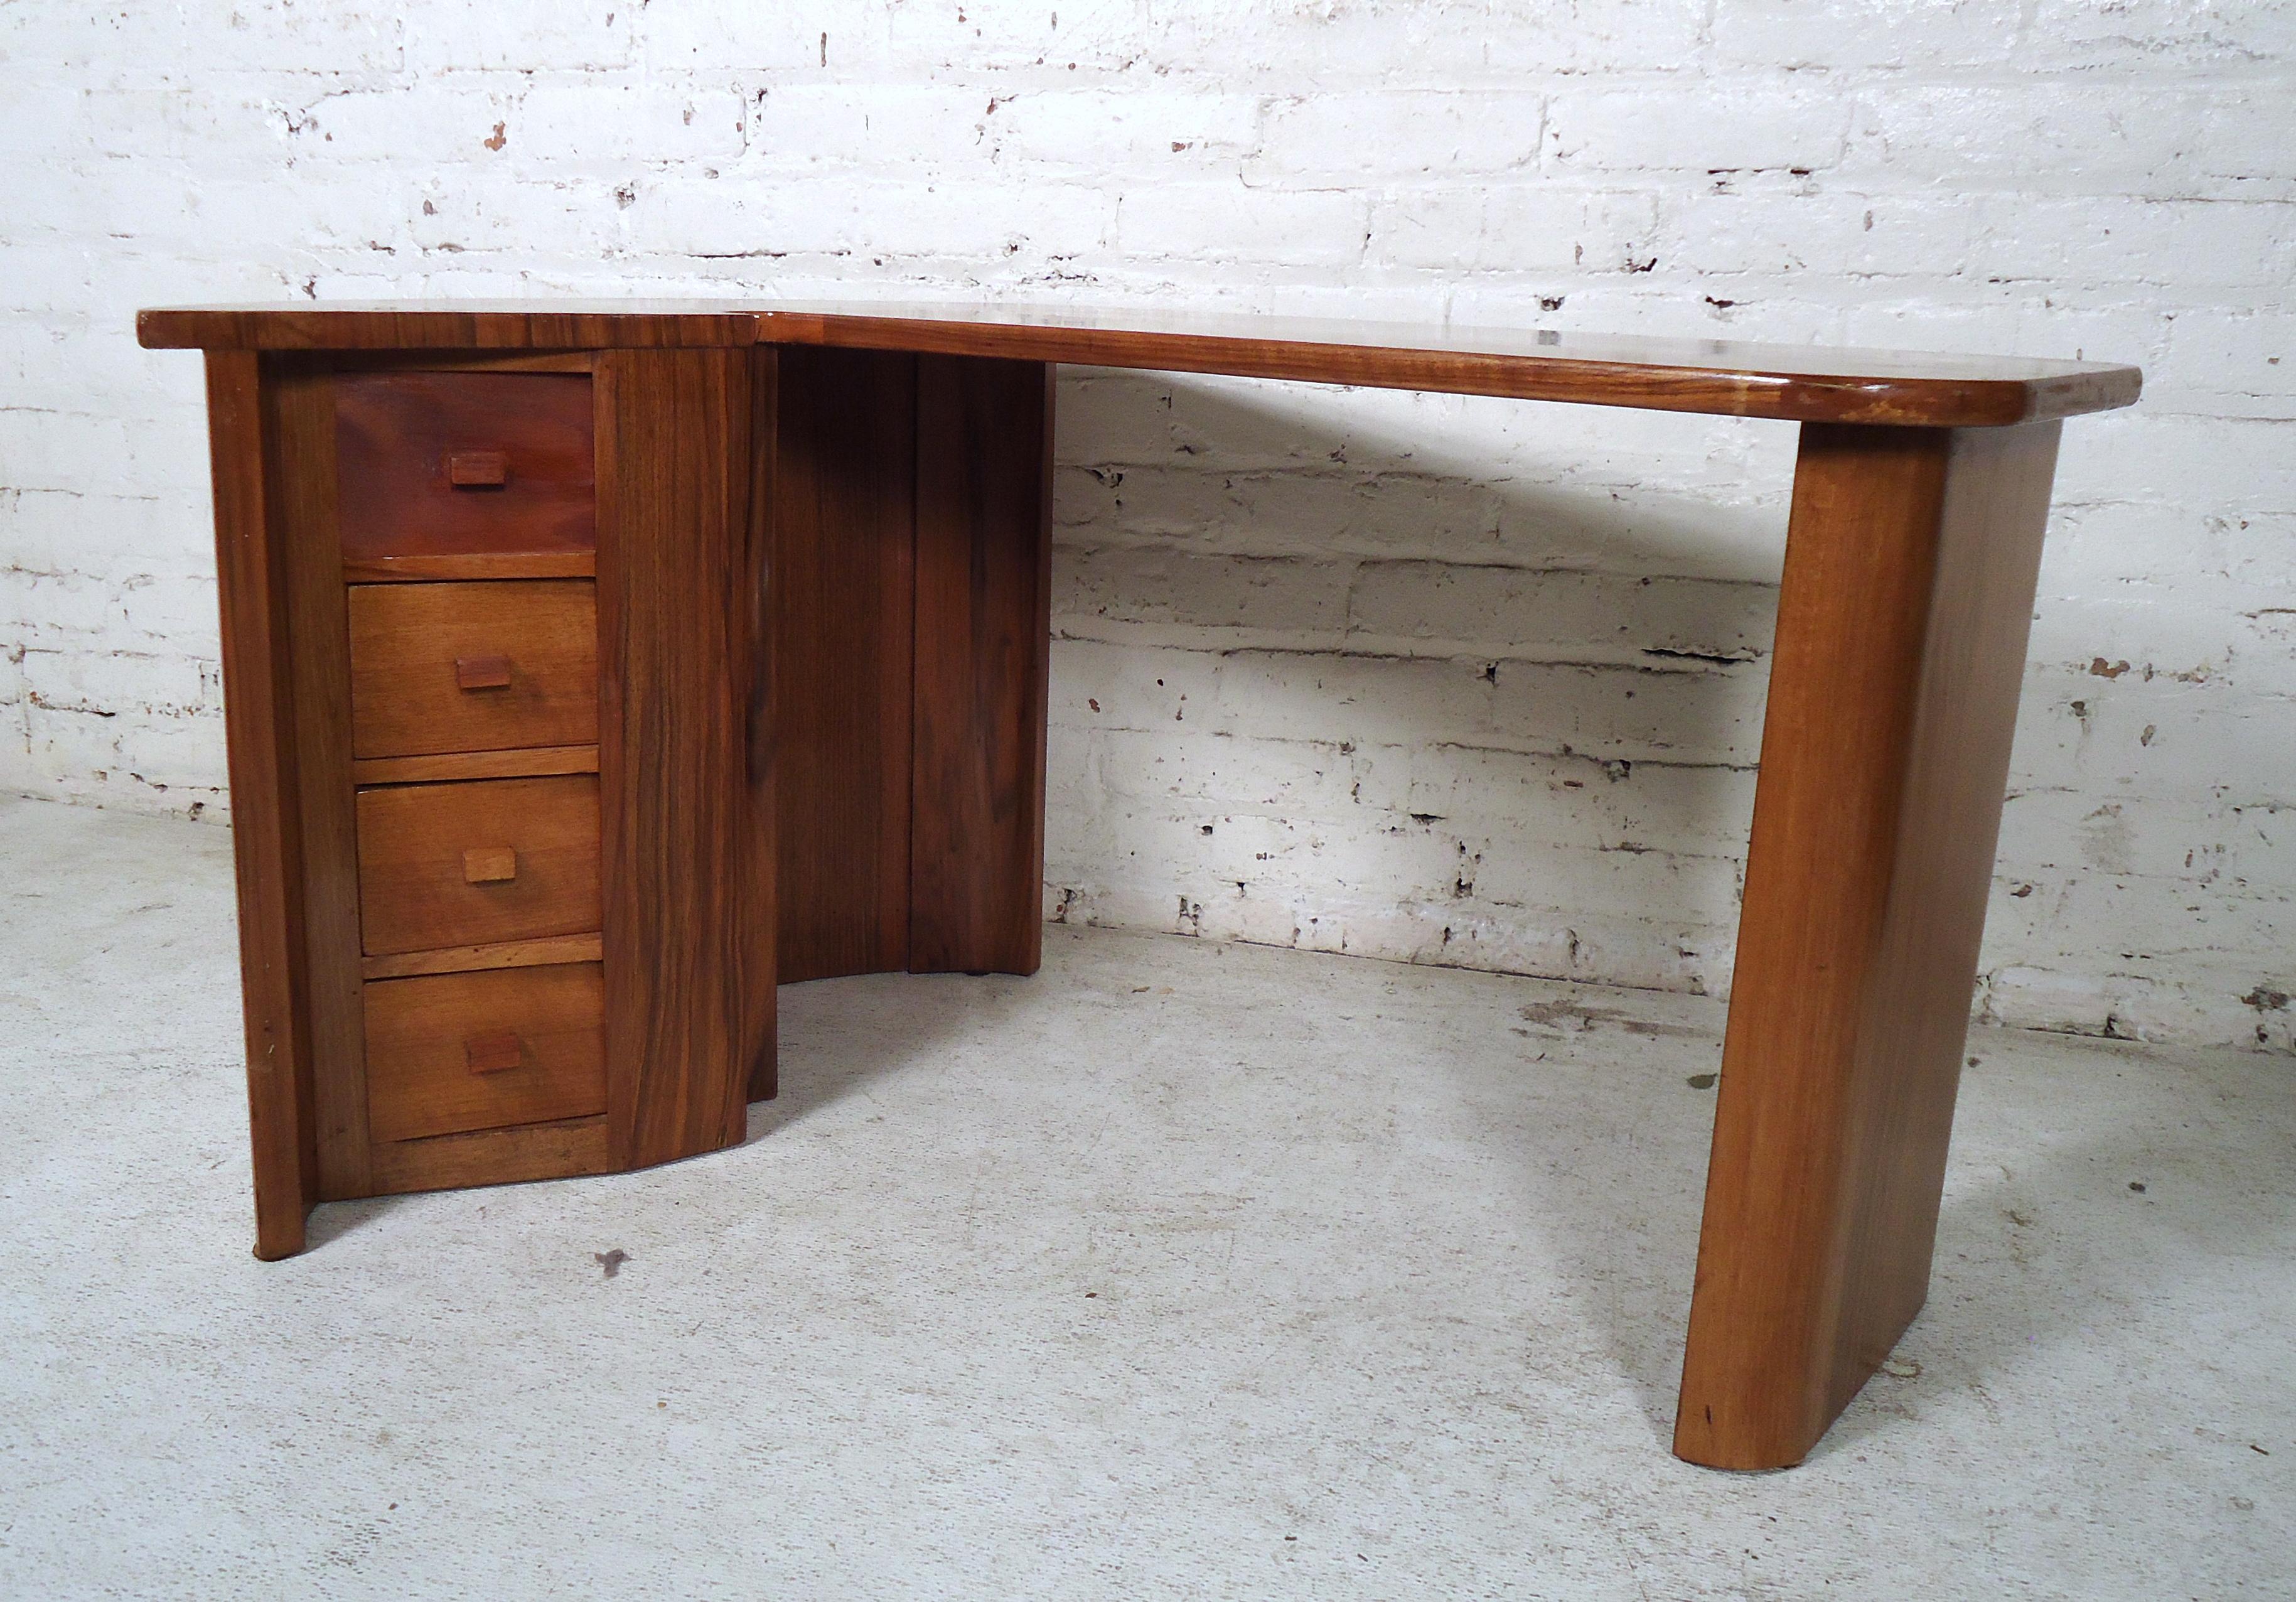 Small Mid-Century Modern boomerang style desk for kids features four drawers with sculpted pulls.

(Please confirm item location-NY or NJ, with dealer).